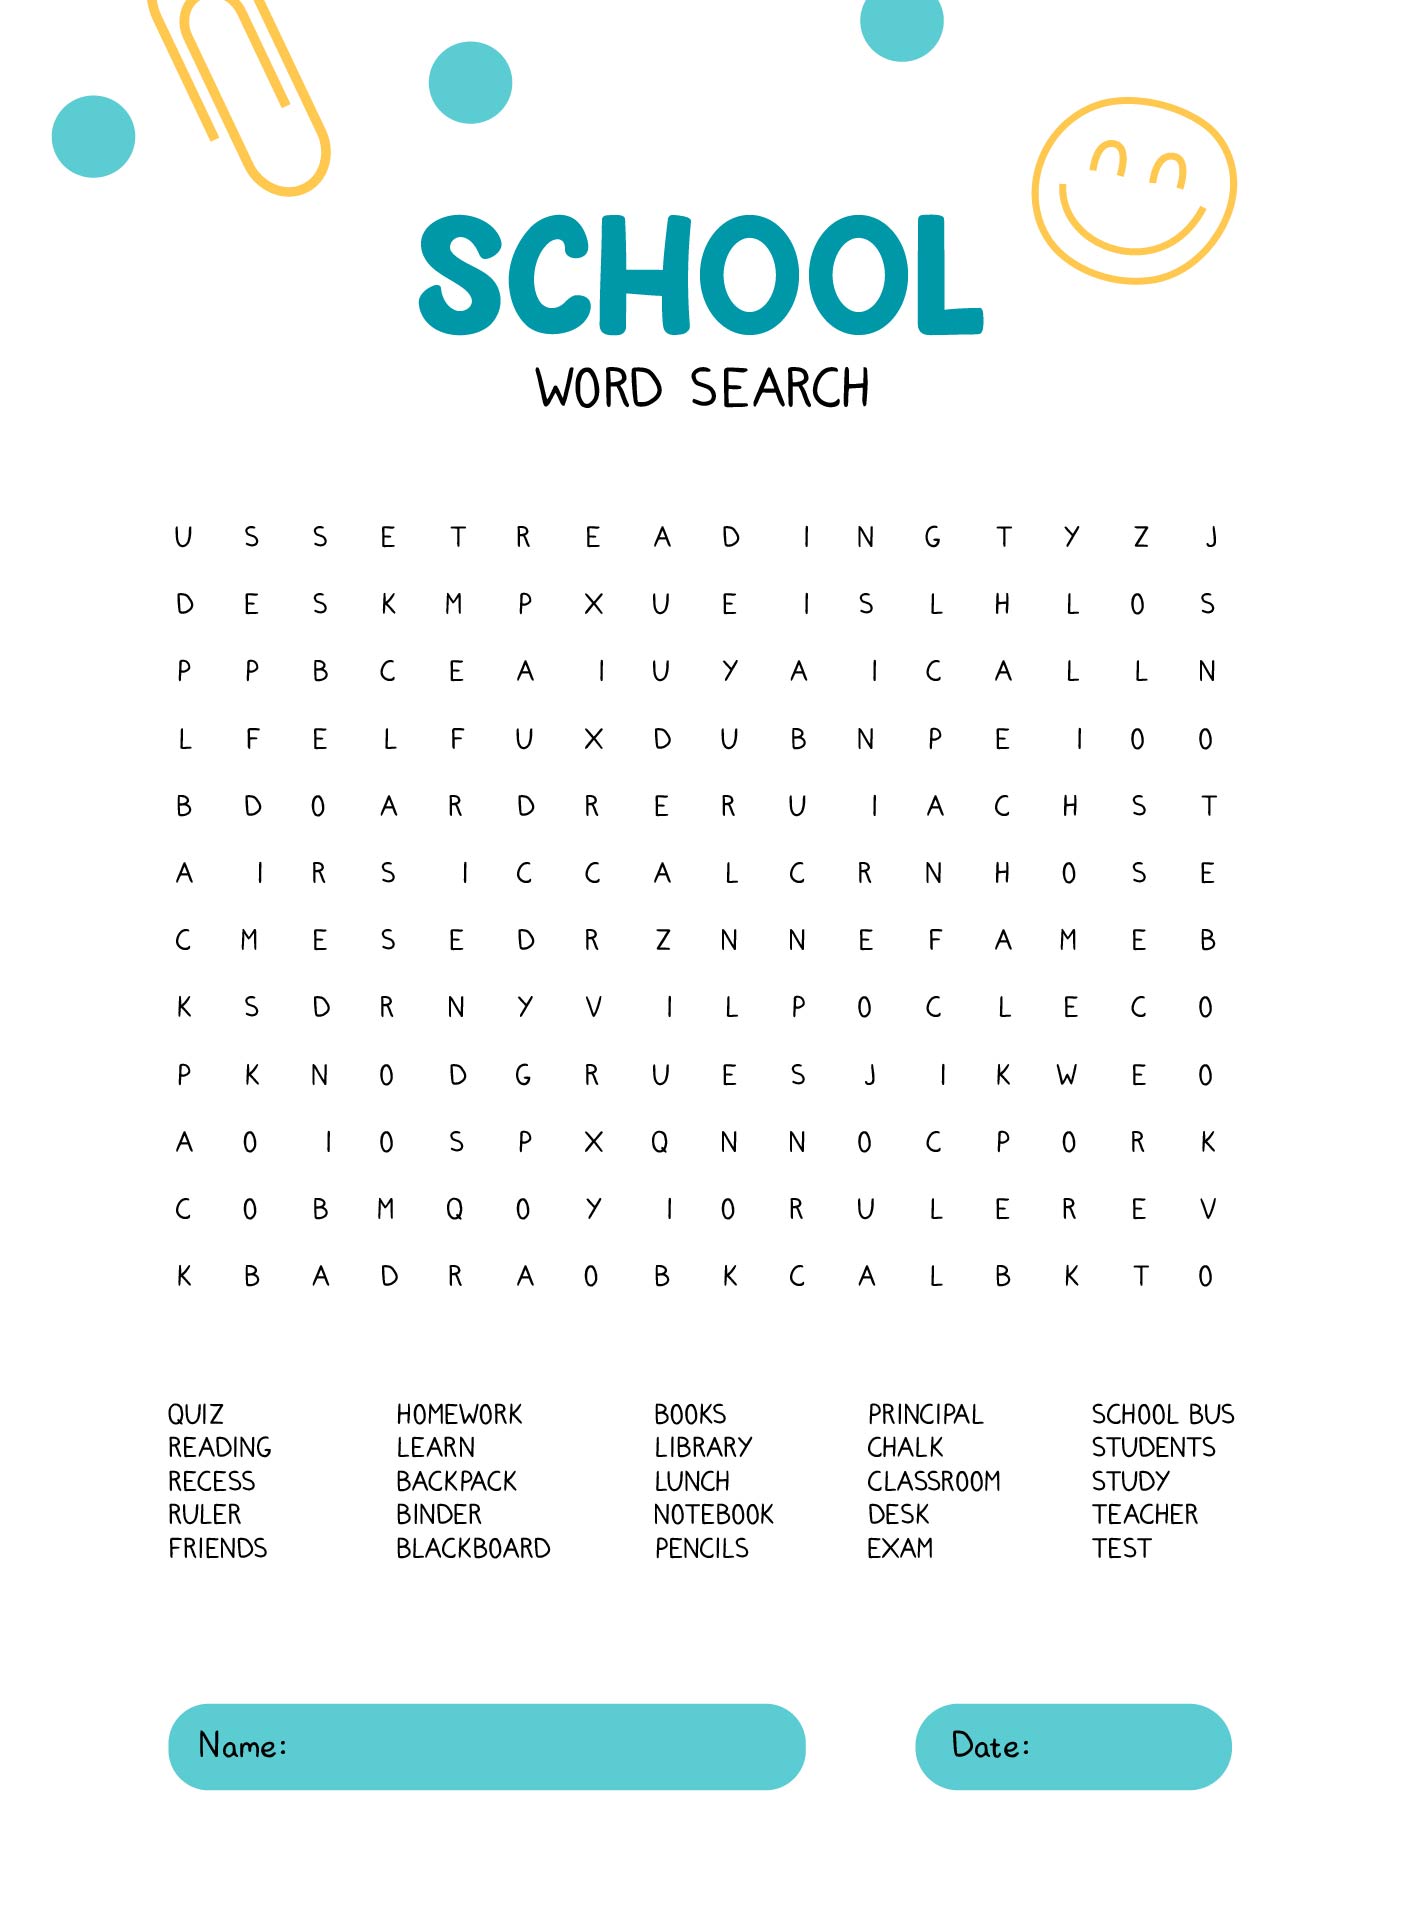 School Word Search Puzzles